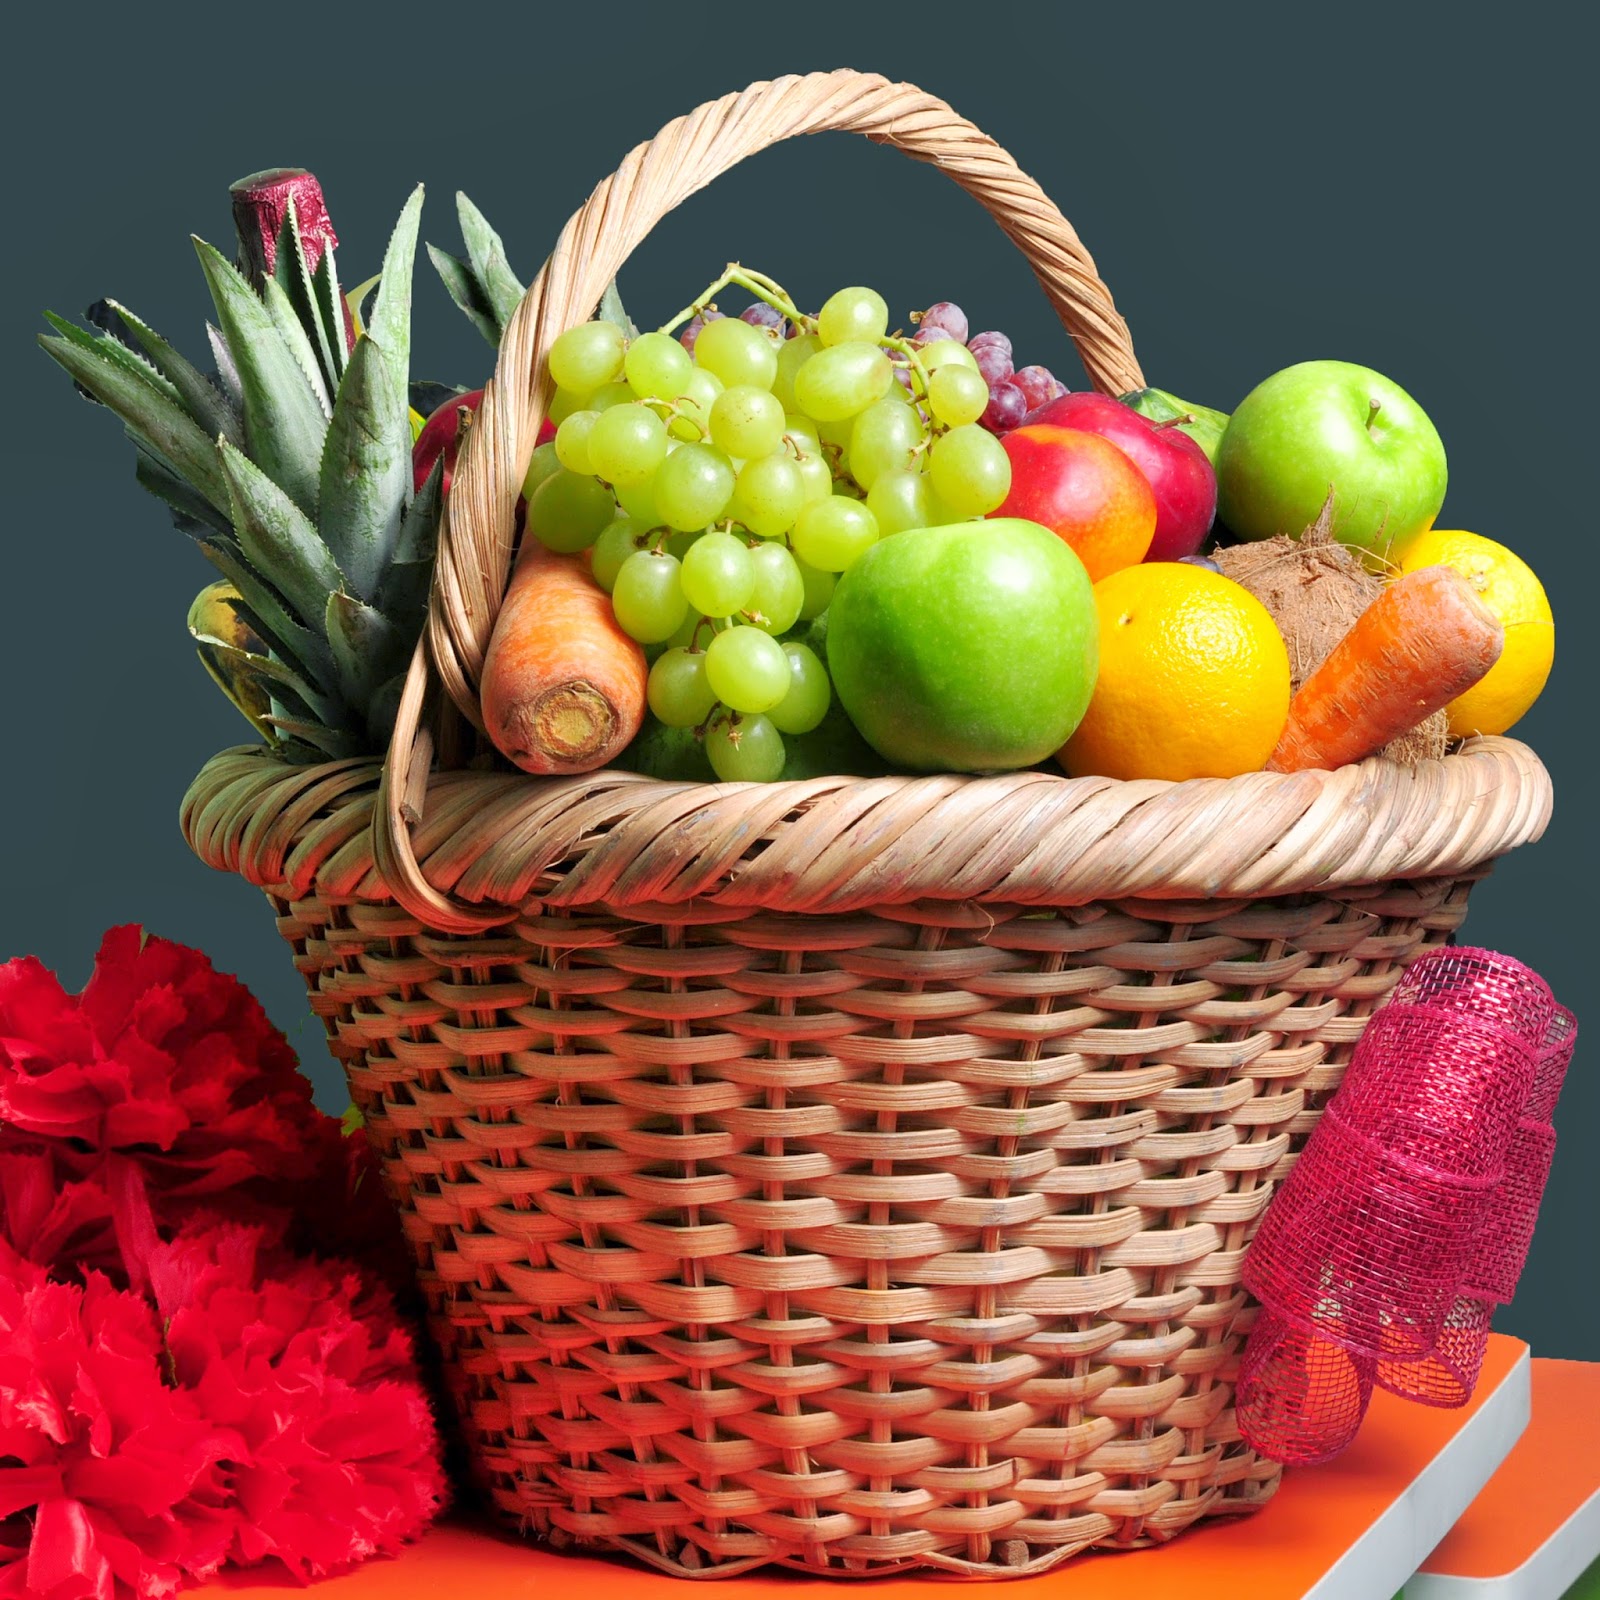 GET THESE YUMMY FRUIT BASKETS & GIFT HAMPERS FOR CHRISTMAS FROM SO